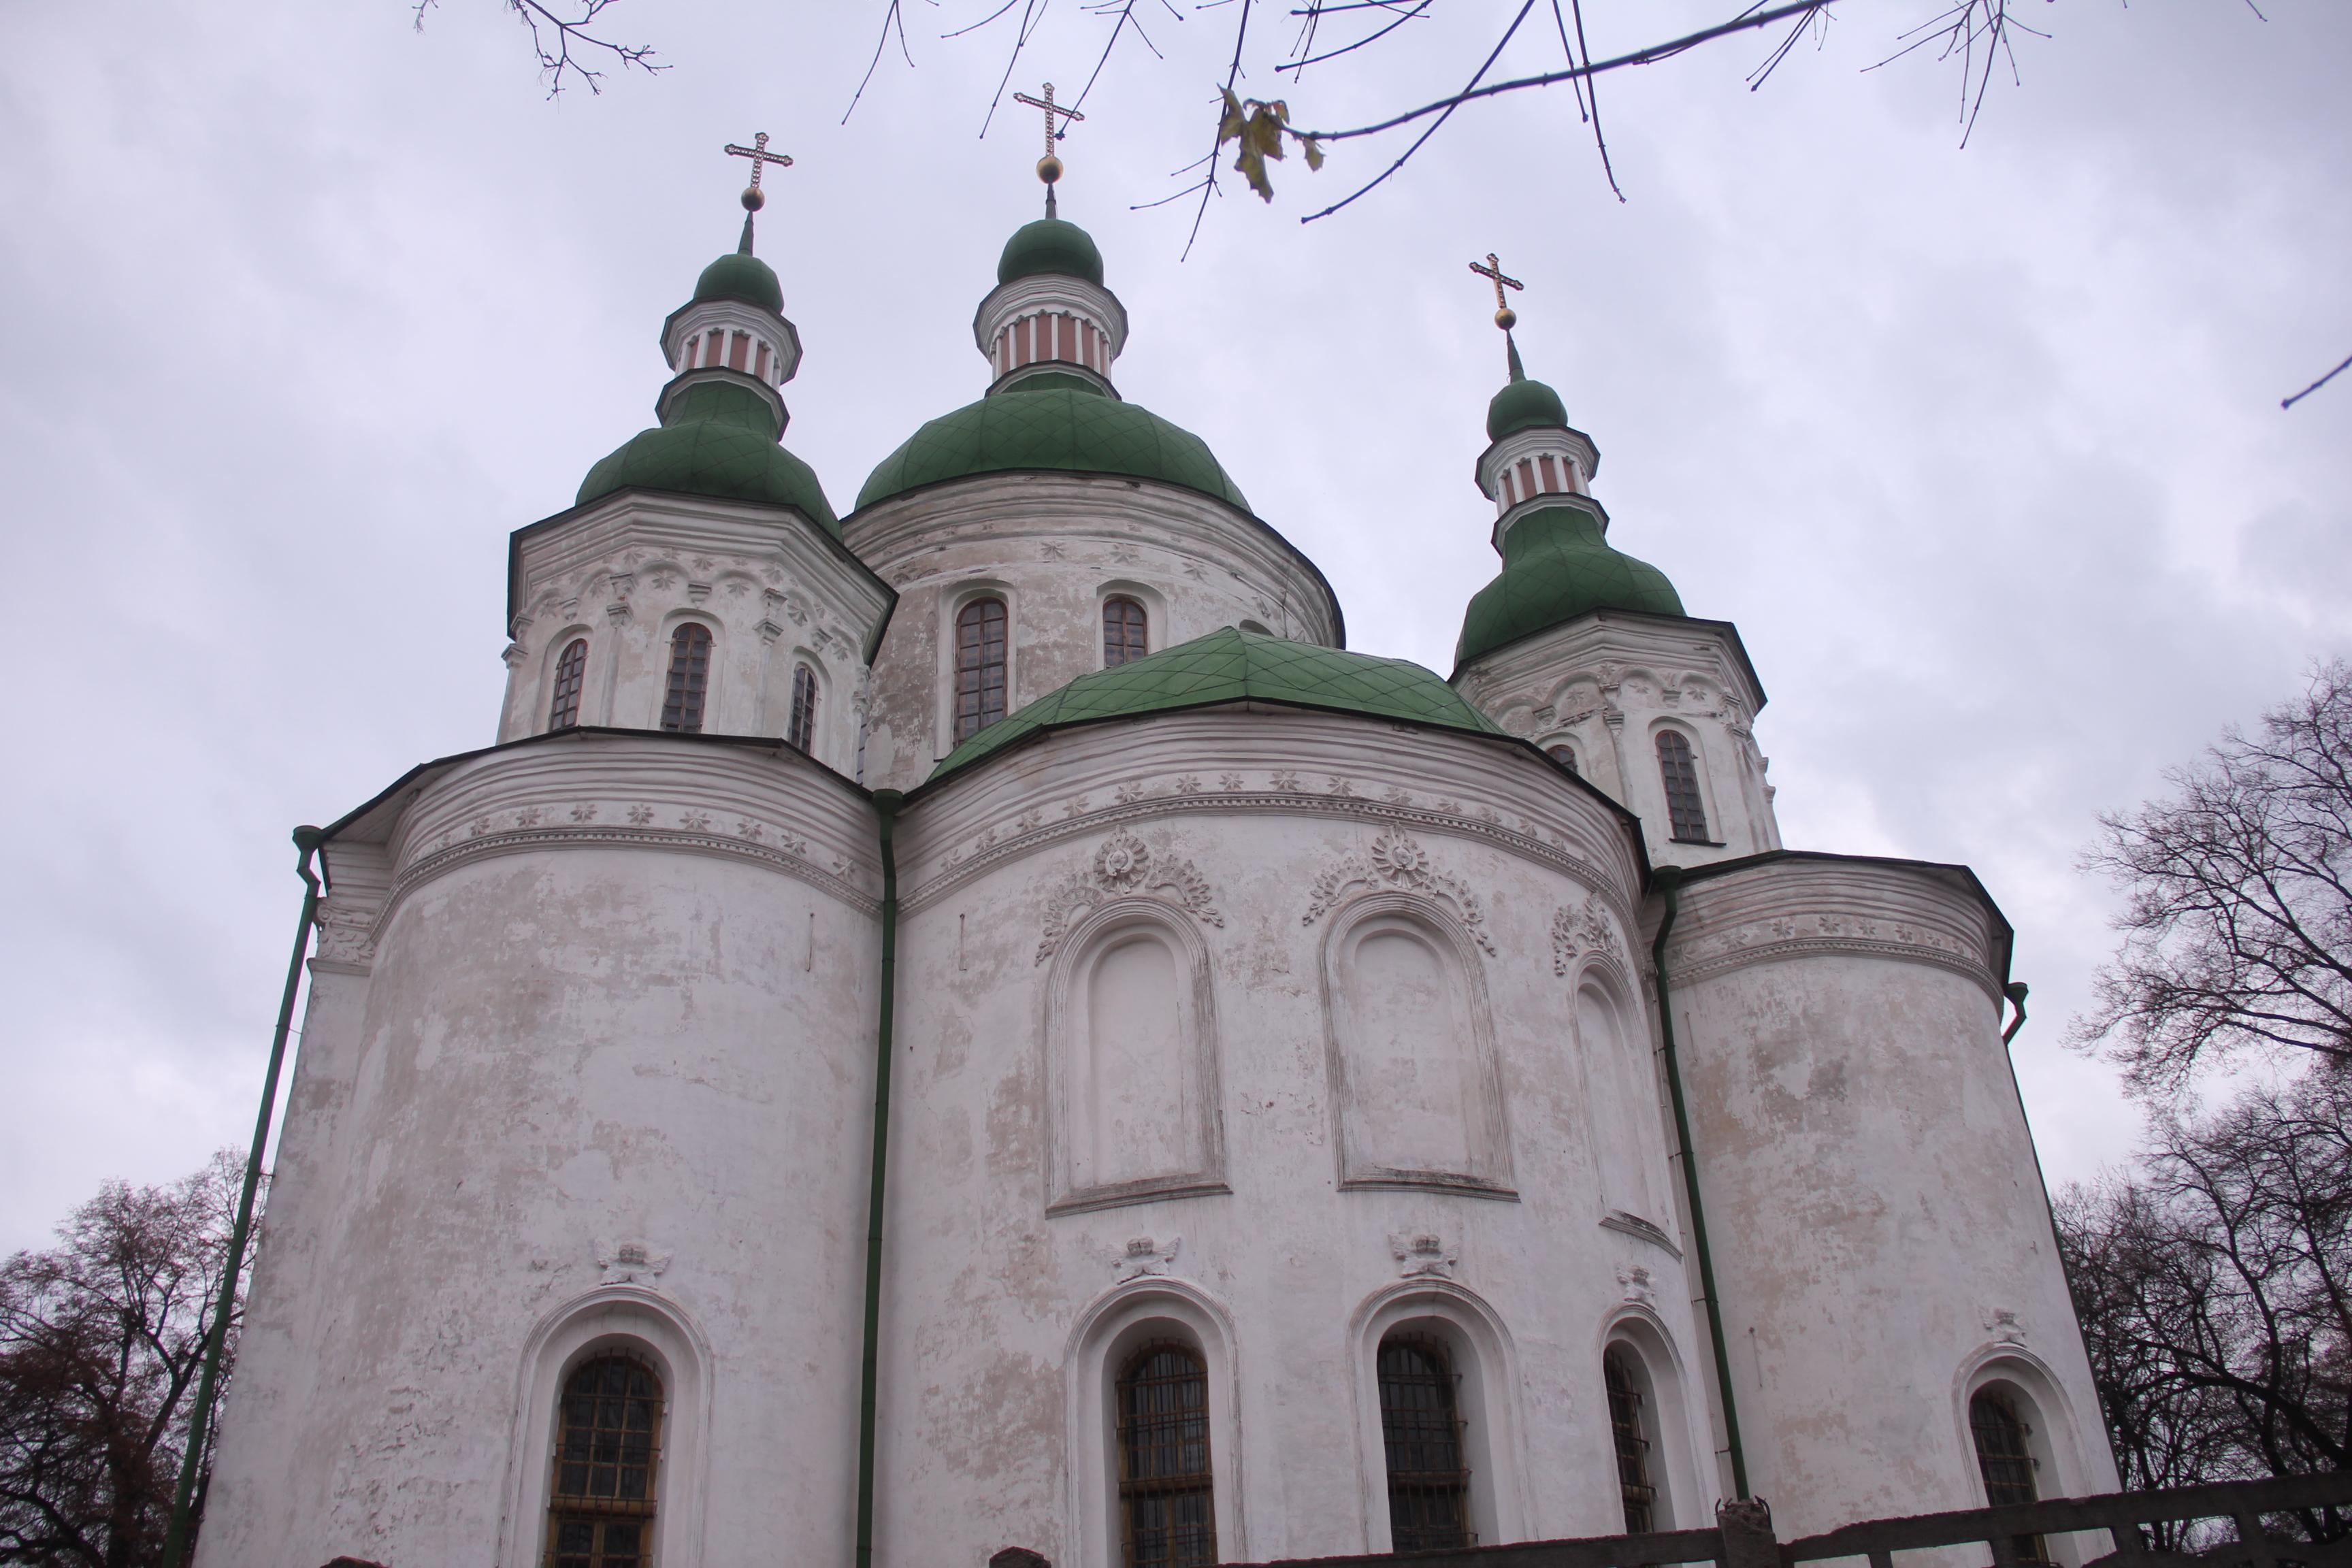 Cover image of this place Кирилівська церква / St. Cyril's Church